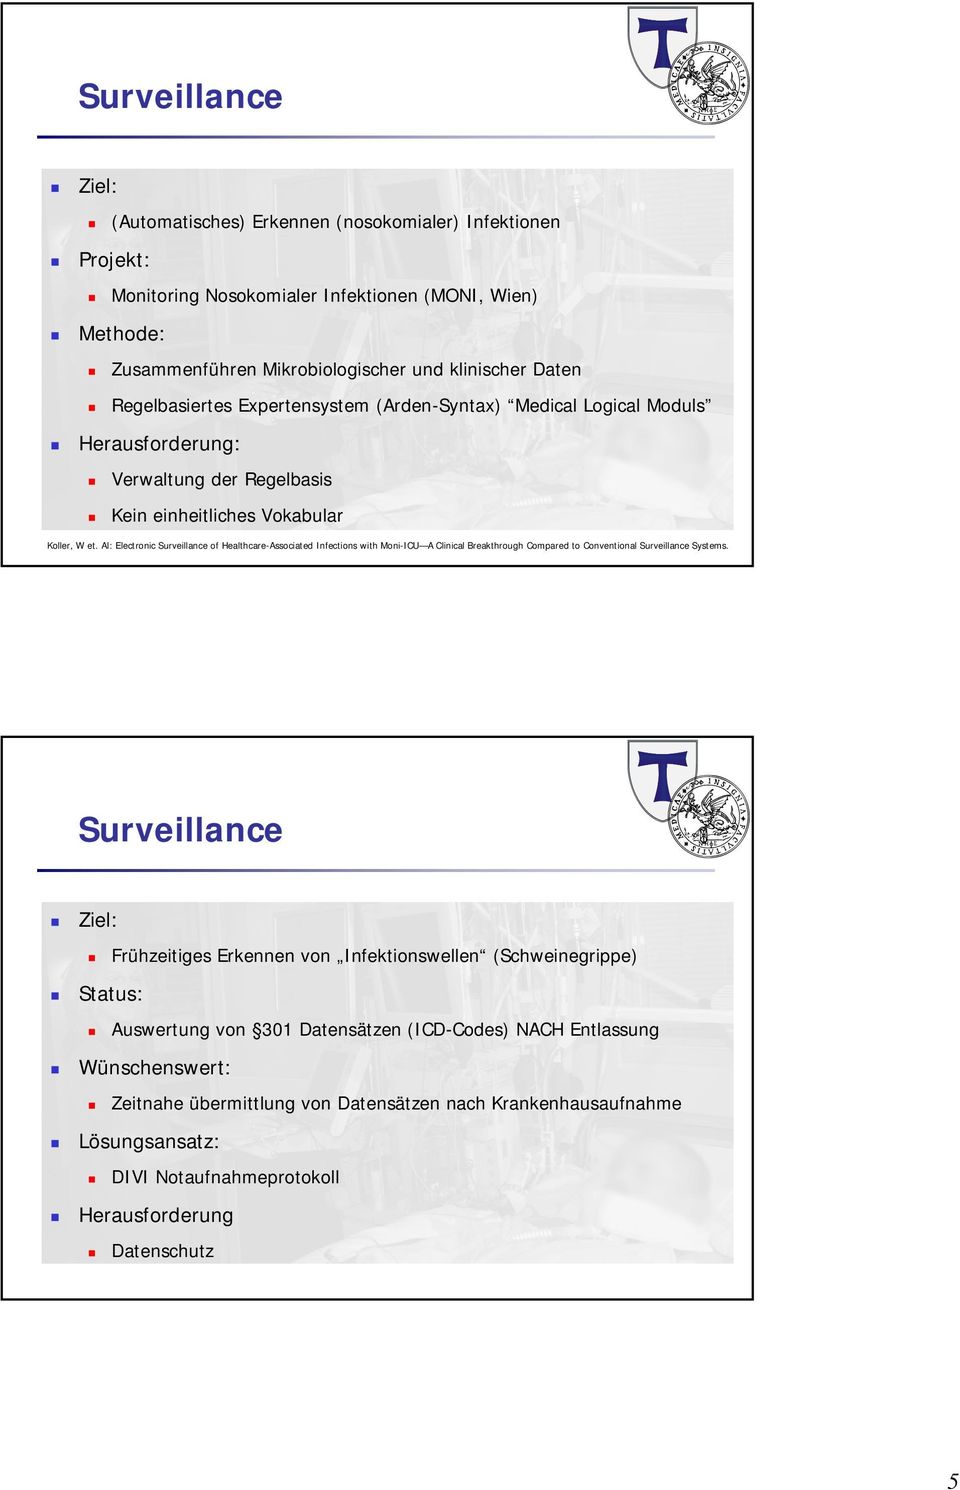 Al: Electronic Surveillance of Healthcare-Associated Infections with Moni-ICU A Clinical Breakthrough Compared to Conventional Surveillance Systems.